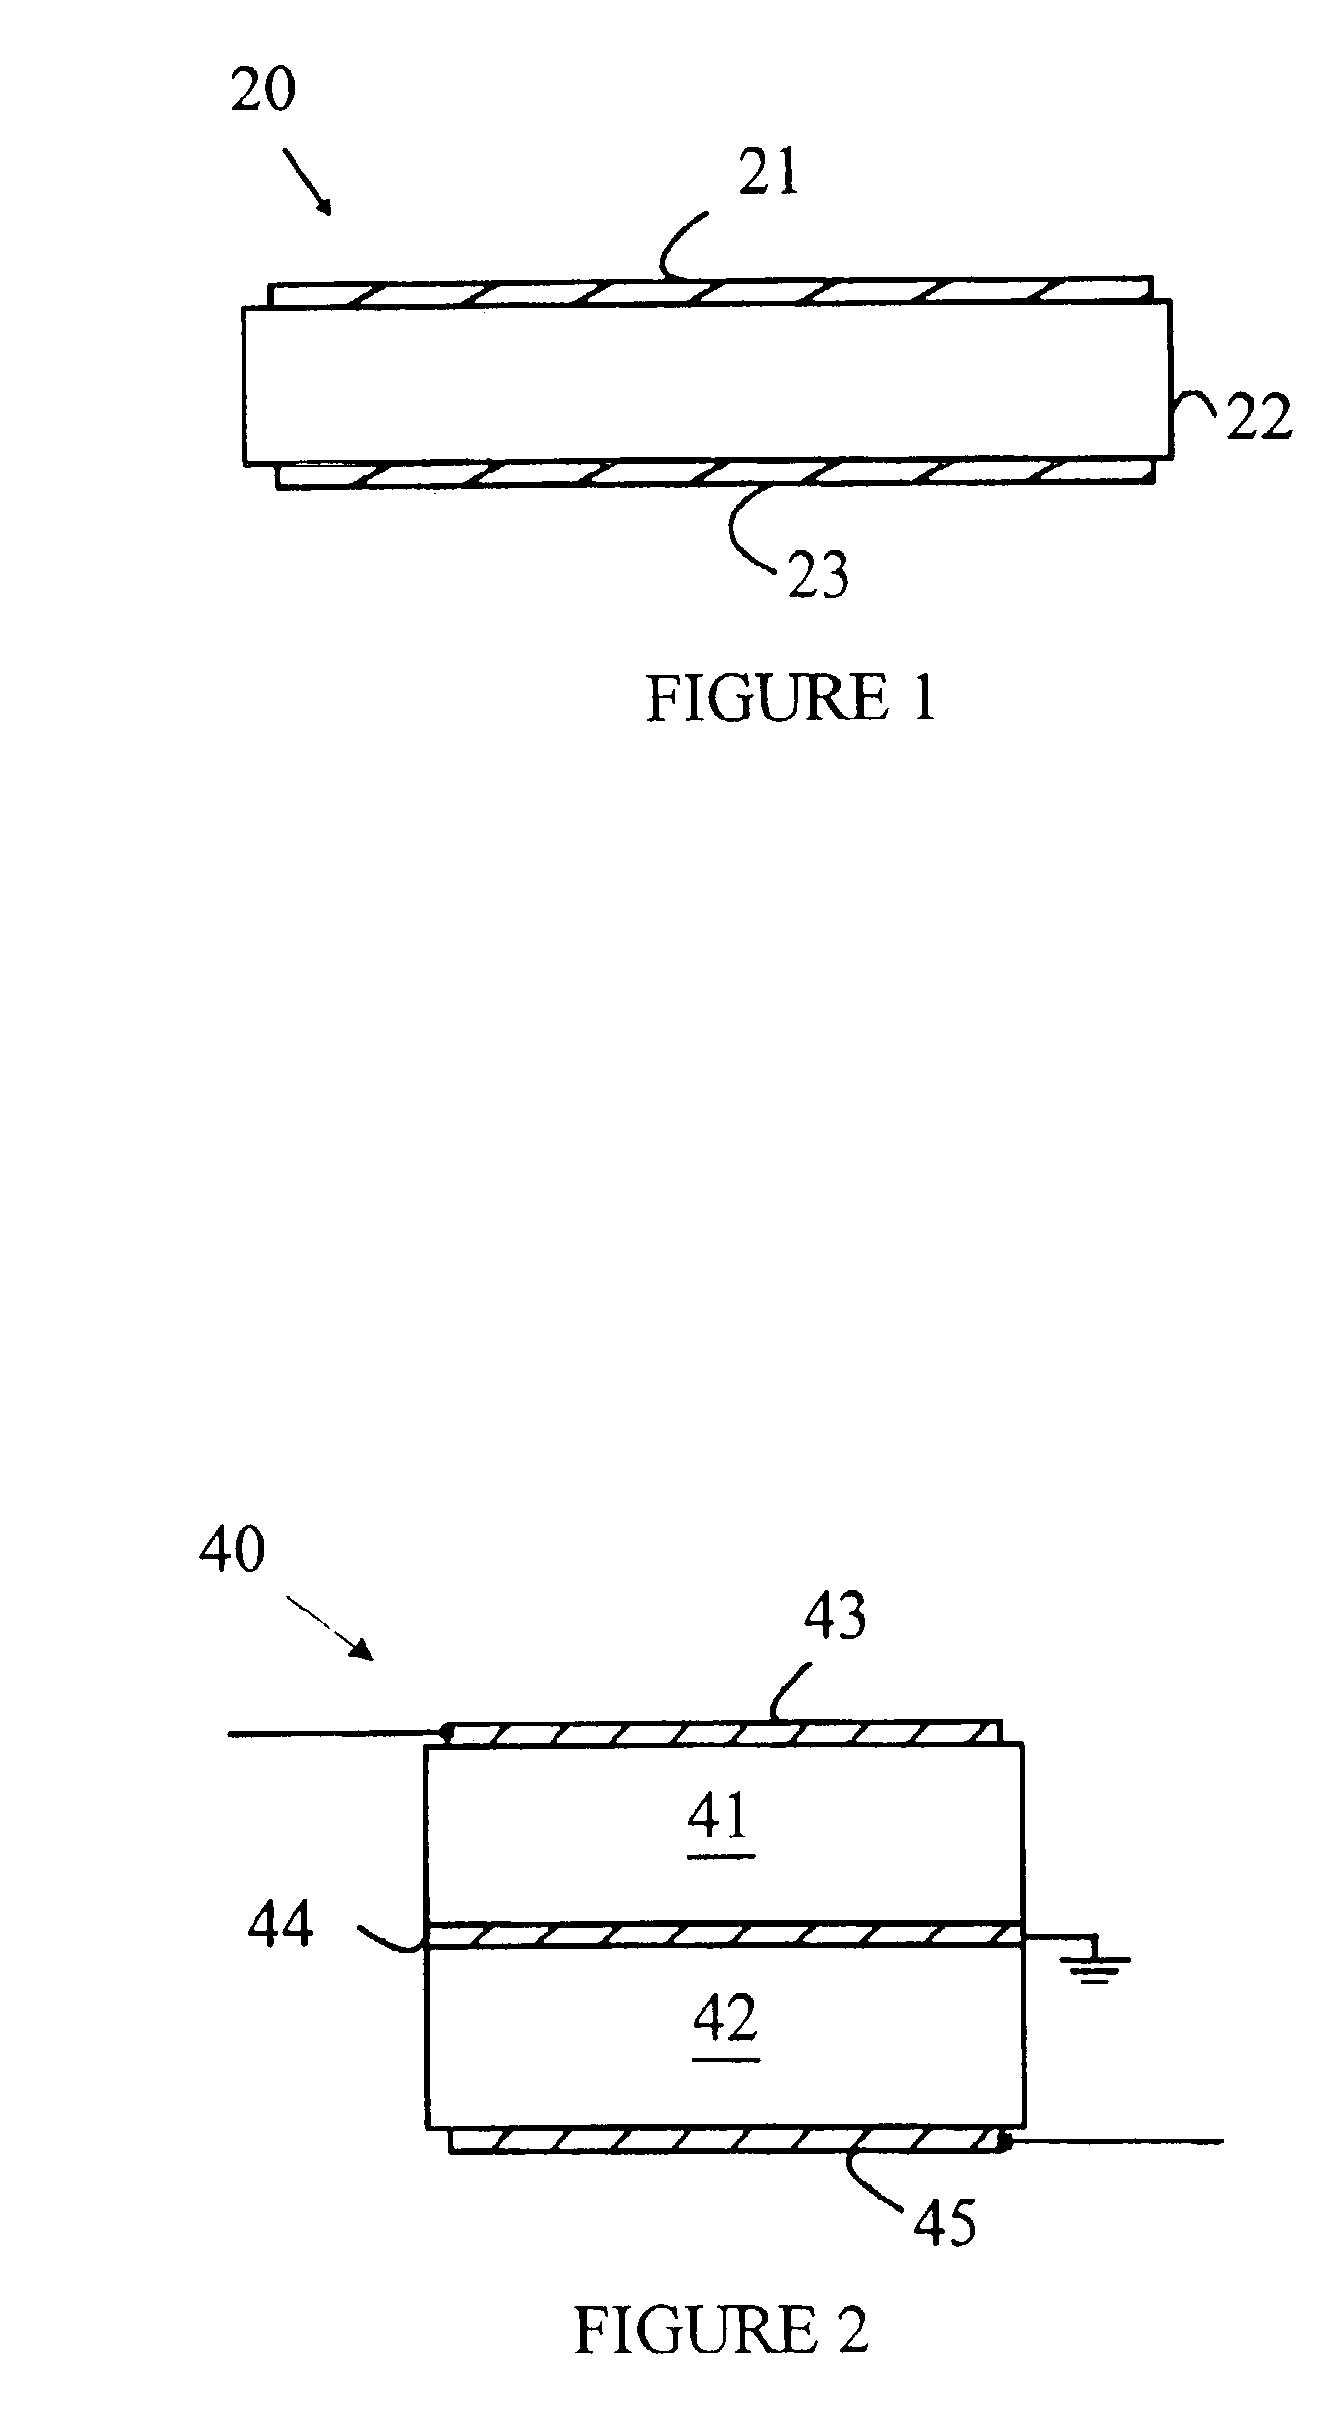 Method for fabricating an acoustical resonator on a substrate